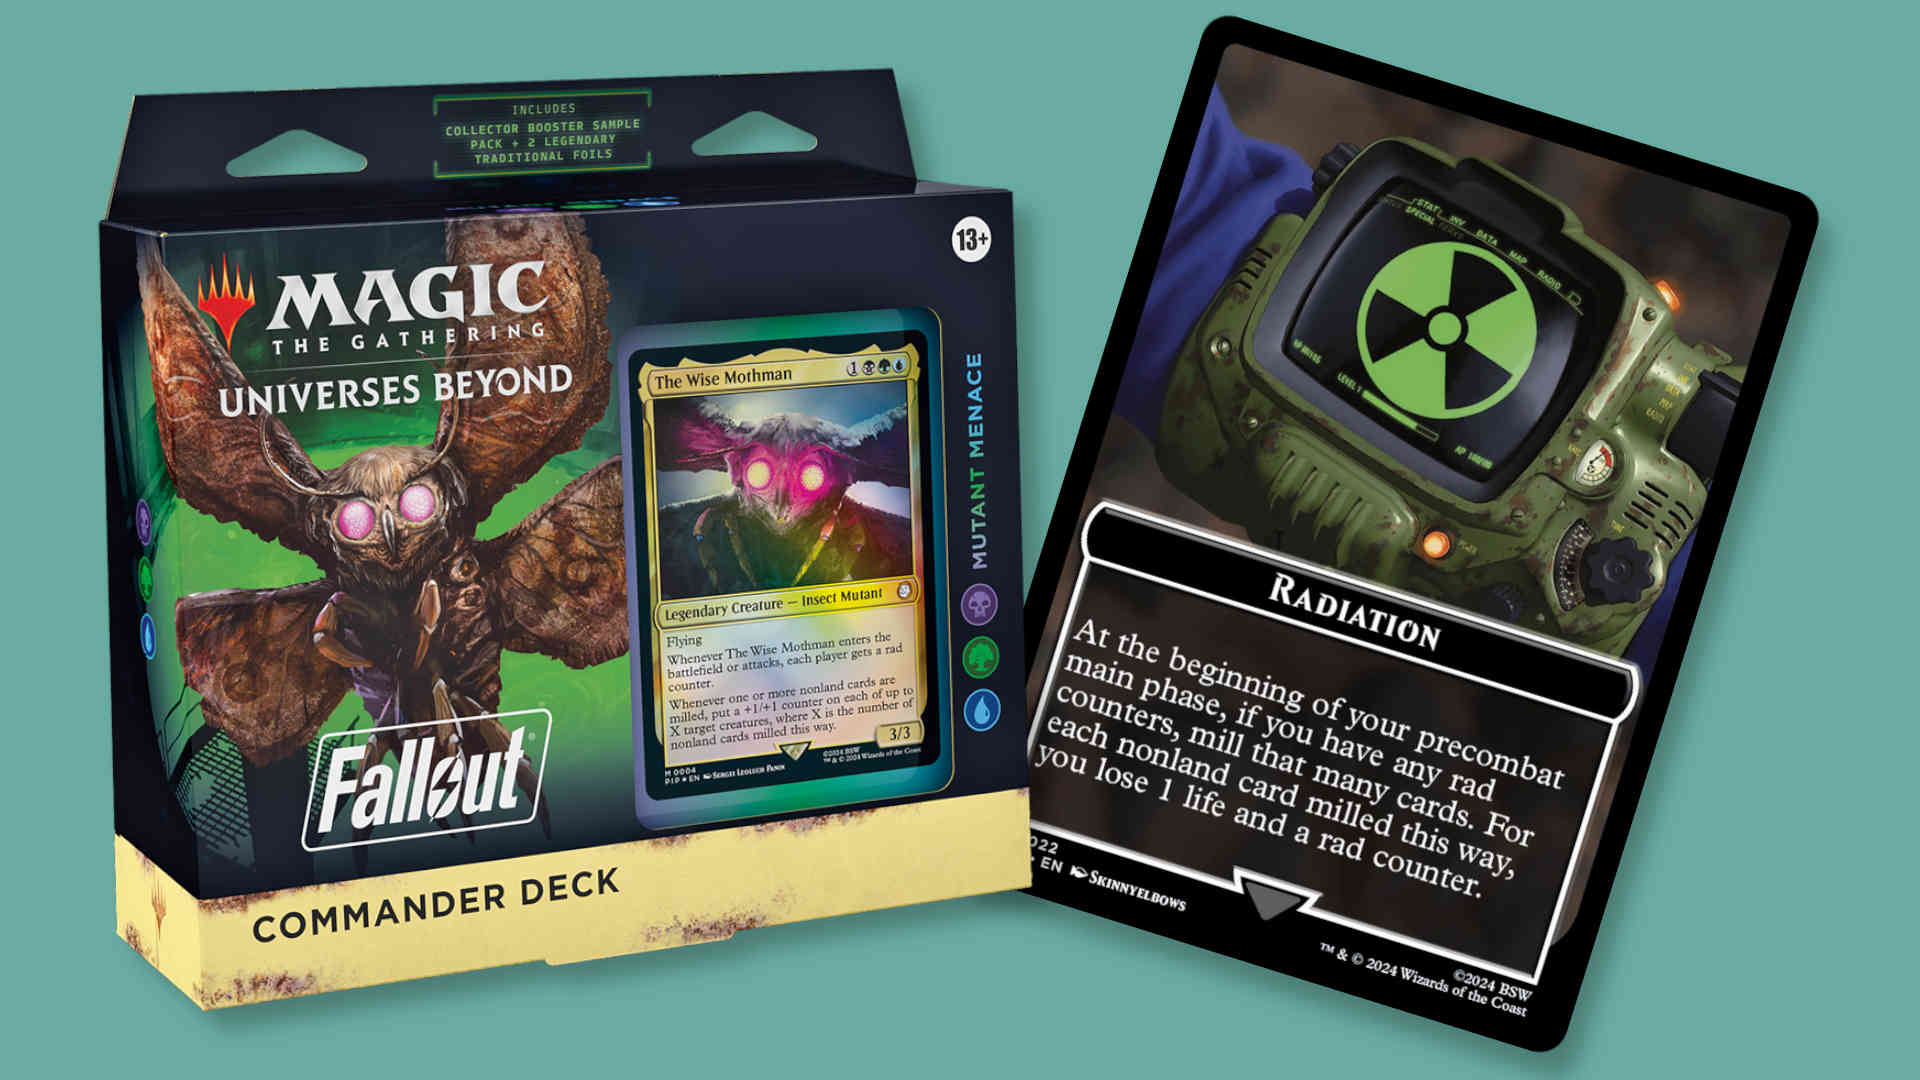 MTG Fallout Deck and Radiation Card